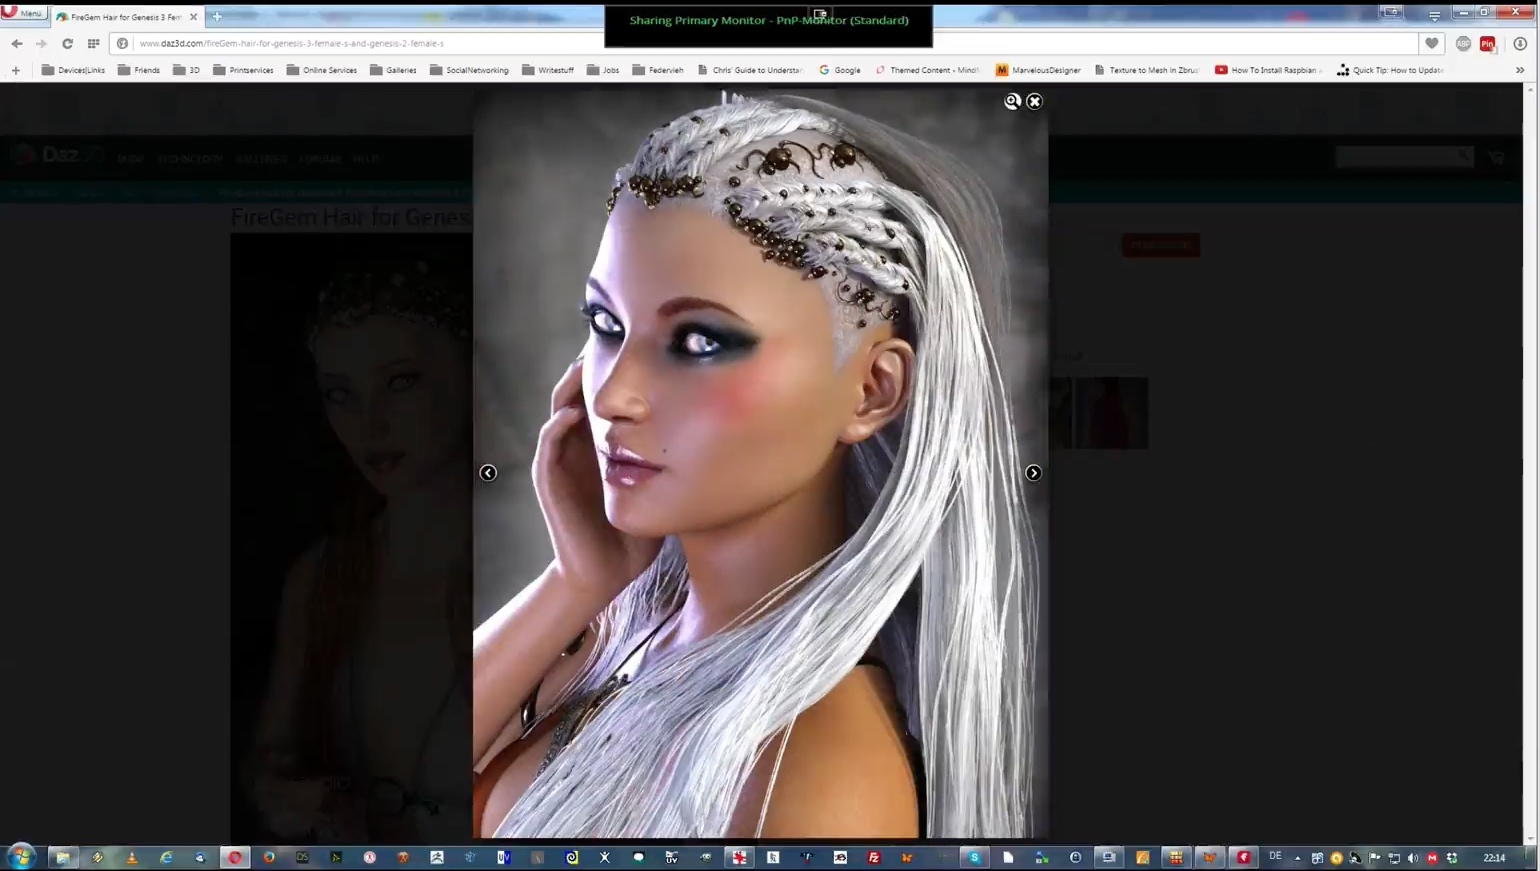 Daz Studio : Creating Themed Content from Concepts to Products by: Digital Art LiveArki, 3D Models by Daz 3D